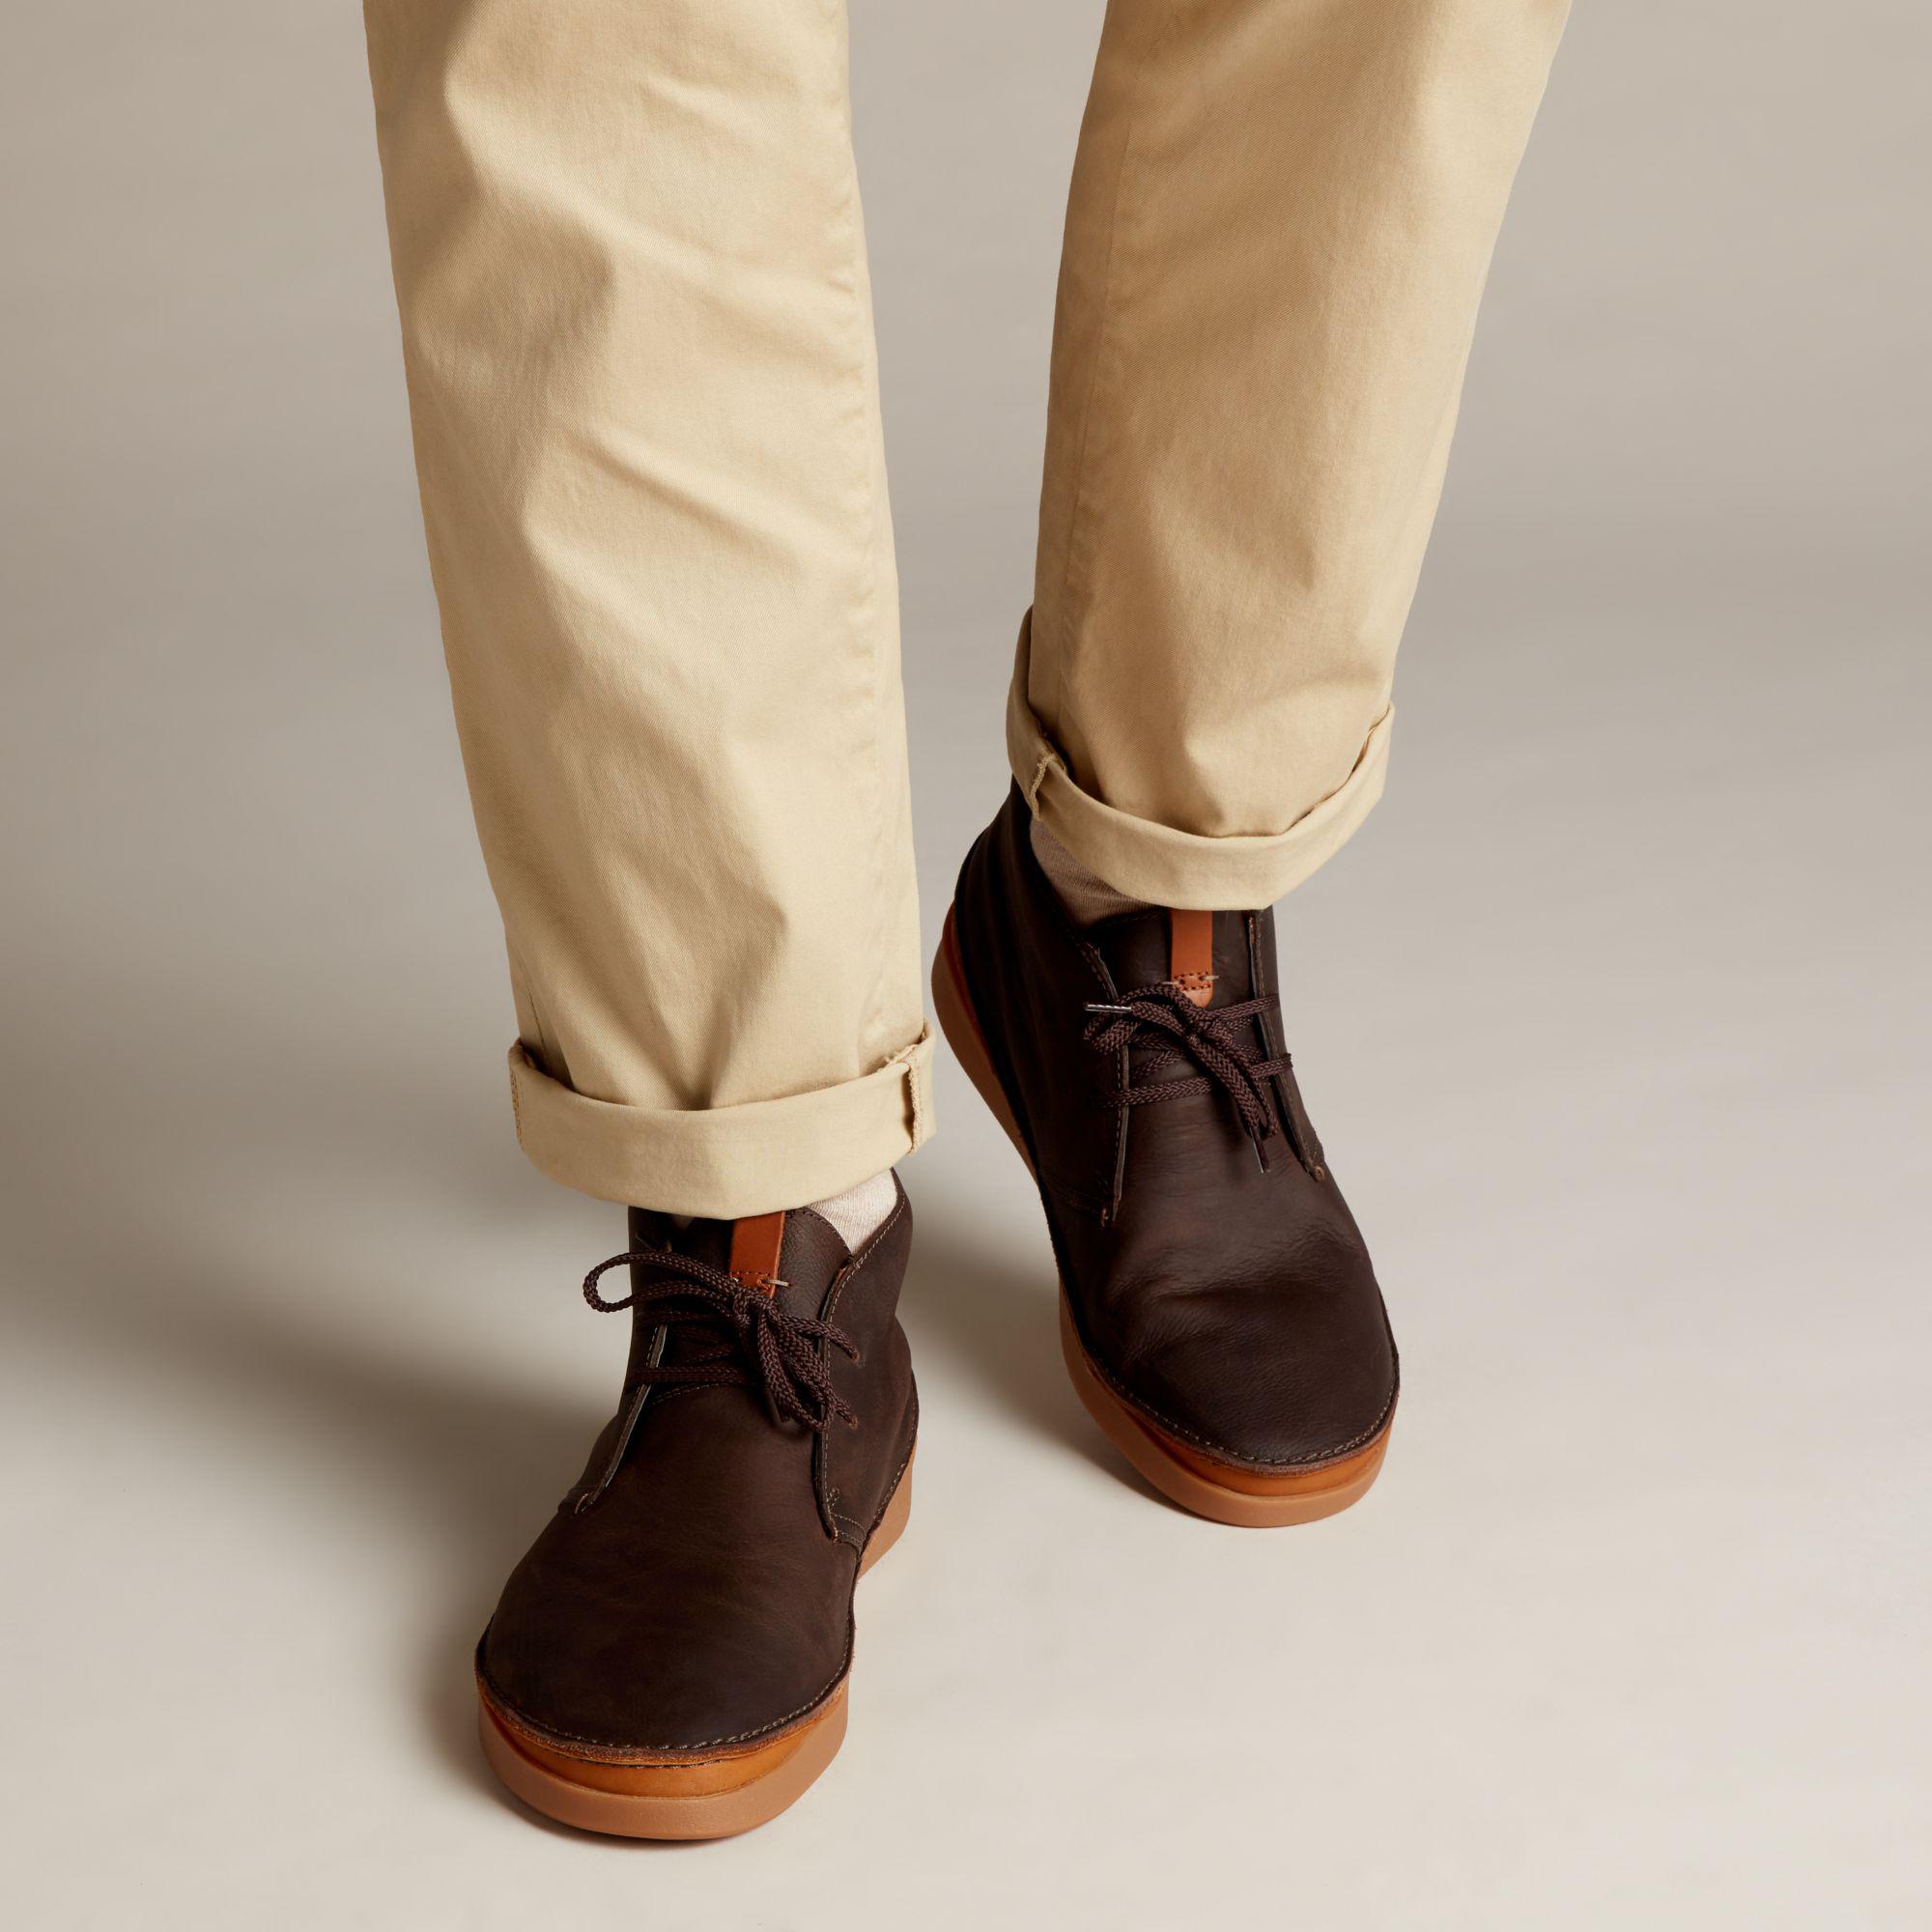 brown leather clarks